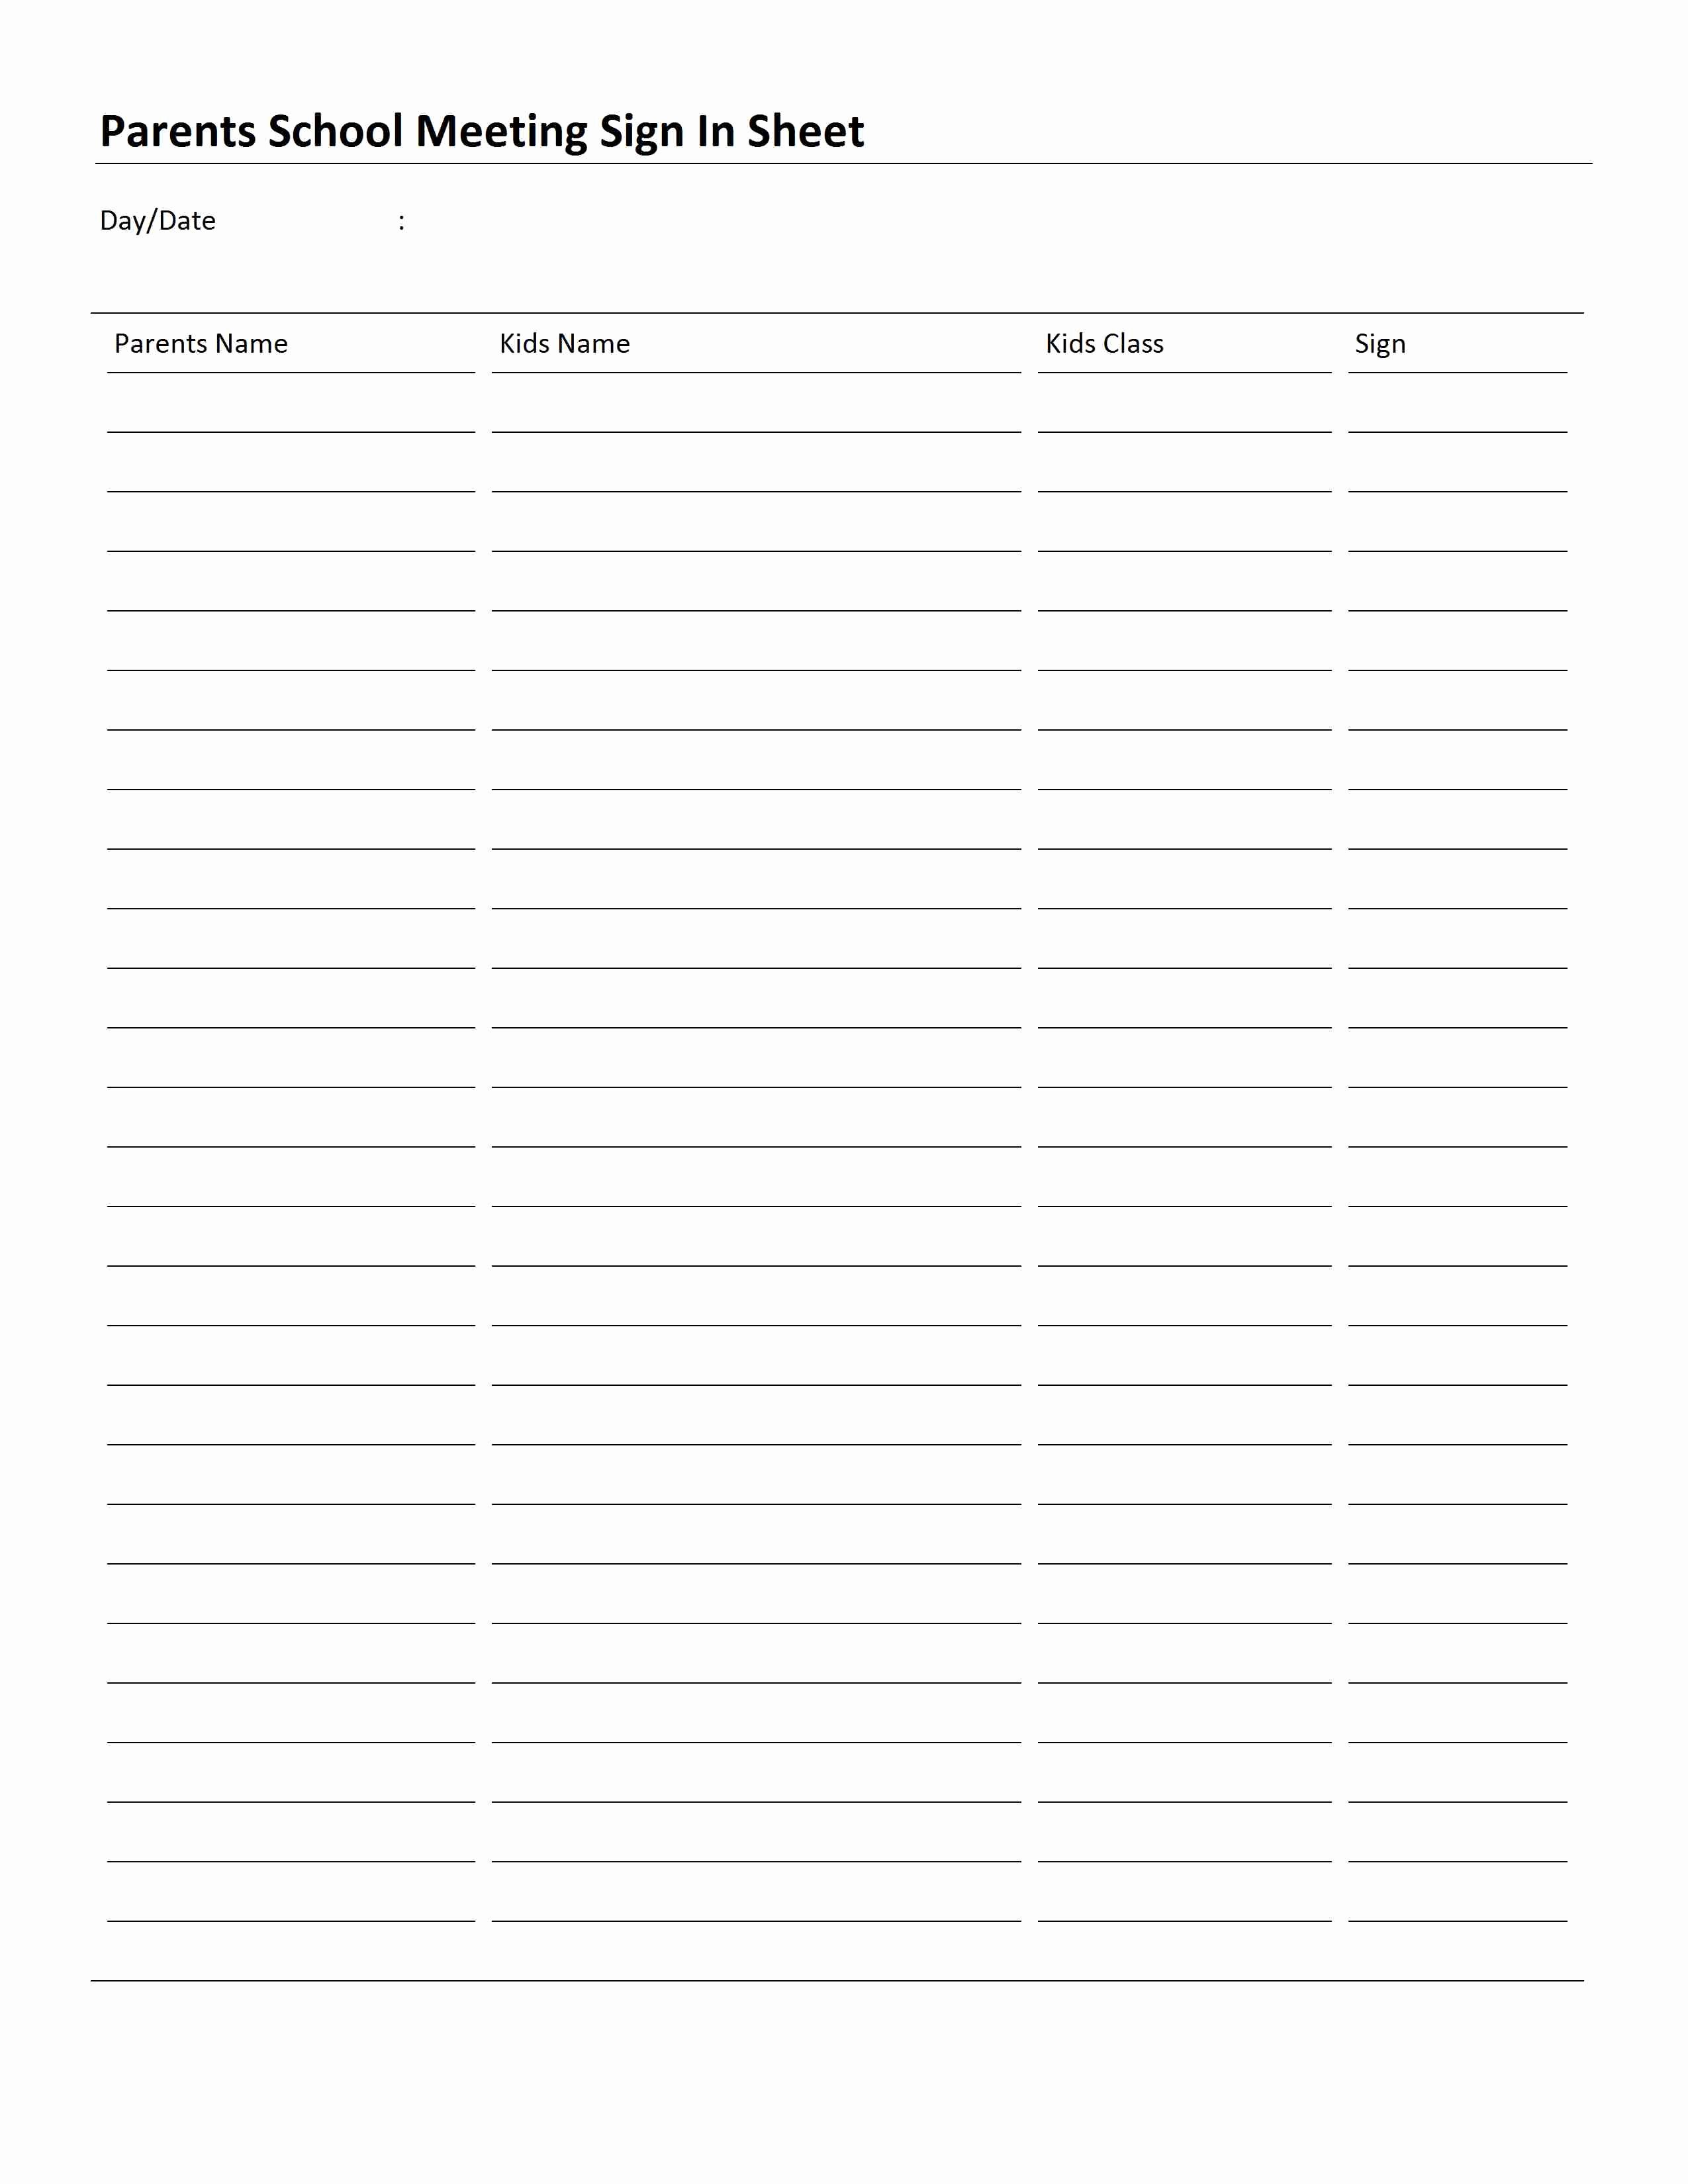 Conference Sign In Sheet Template Unique Parents School Meeting Sign In Sheet